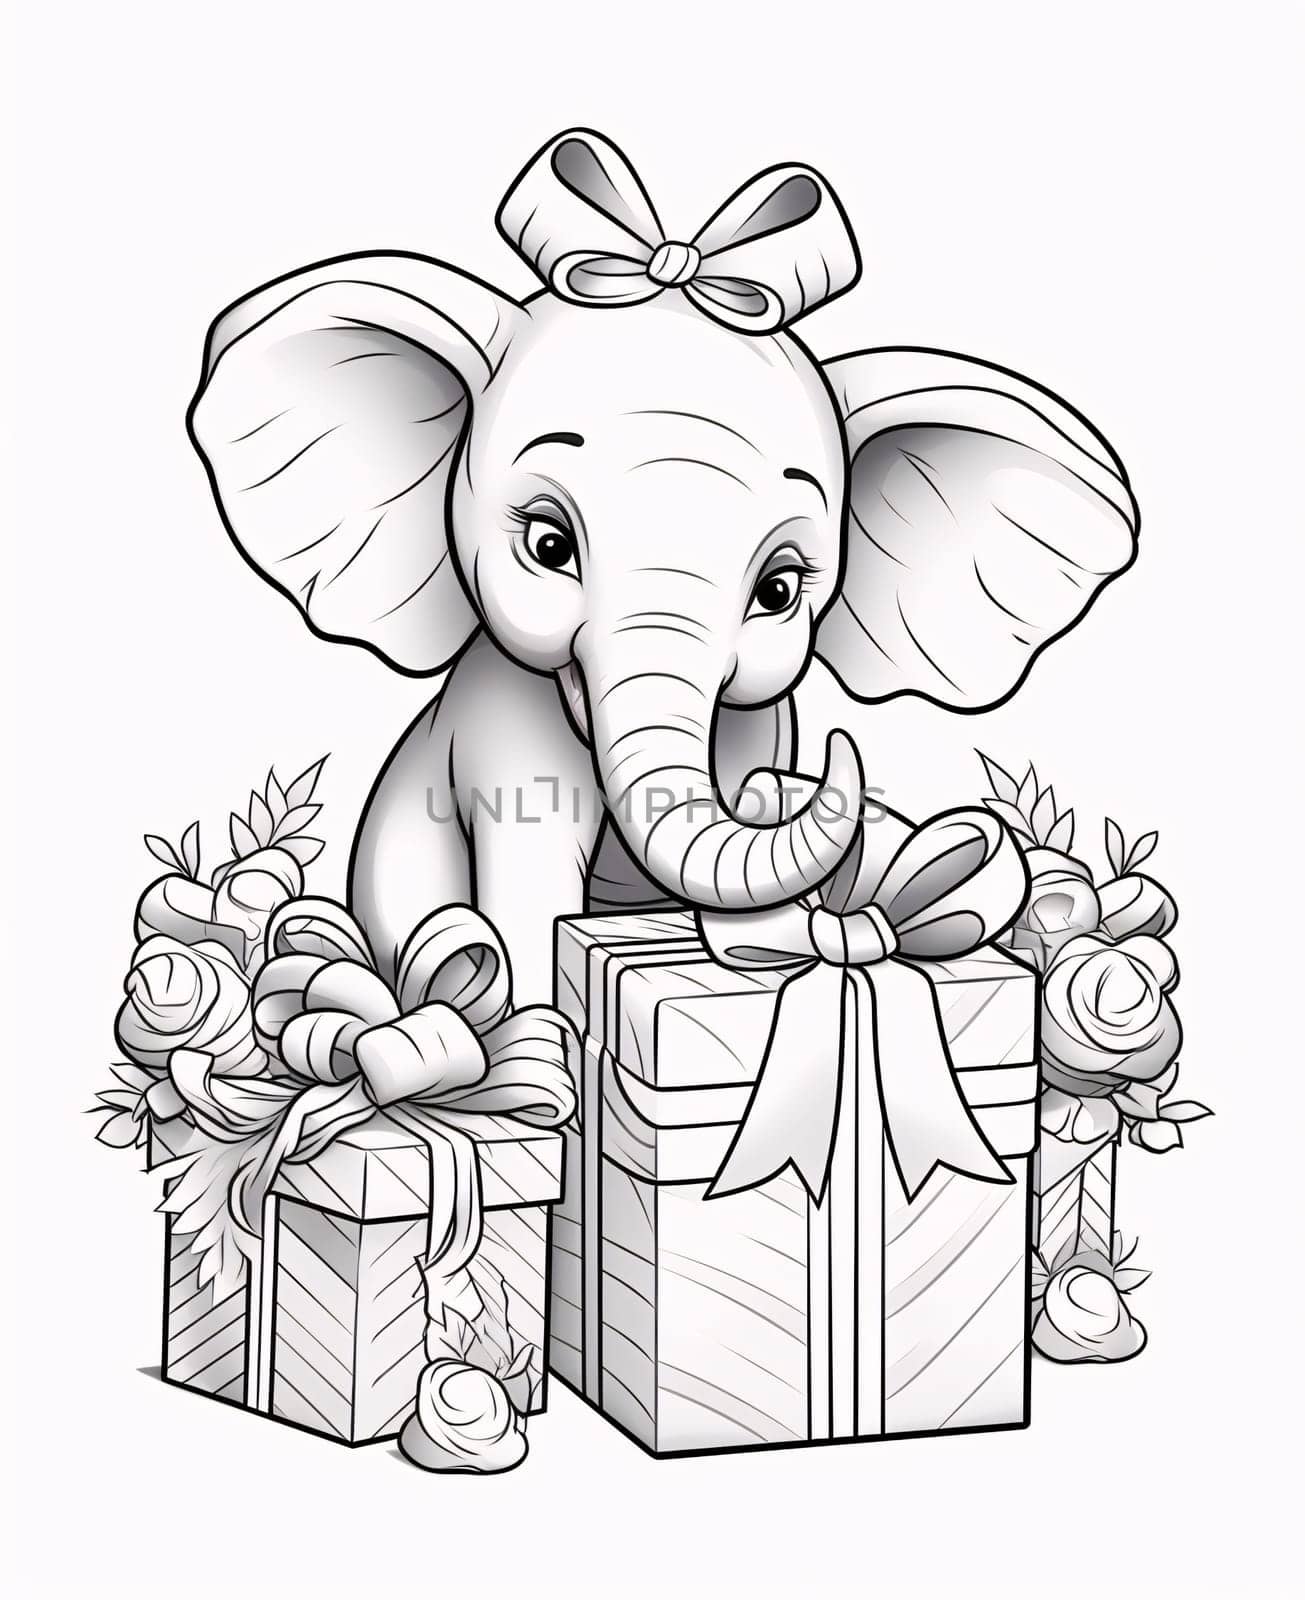 Black and white coloring sheet: Elephant with a gift. Gifts as a day symbol of present and love. by ThemesS